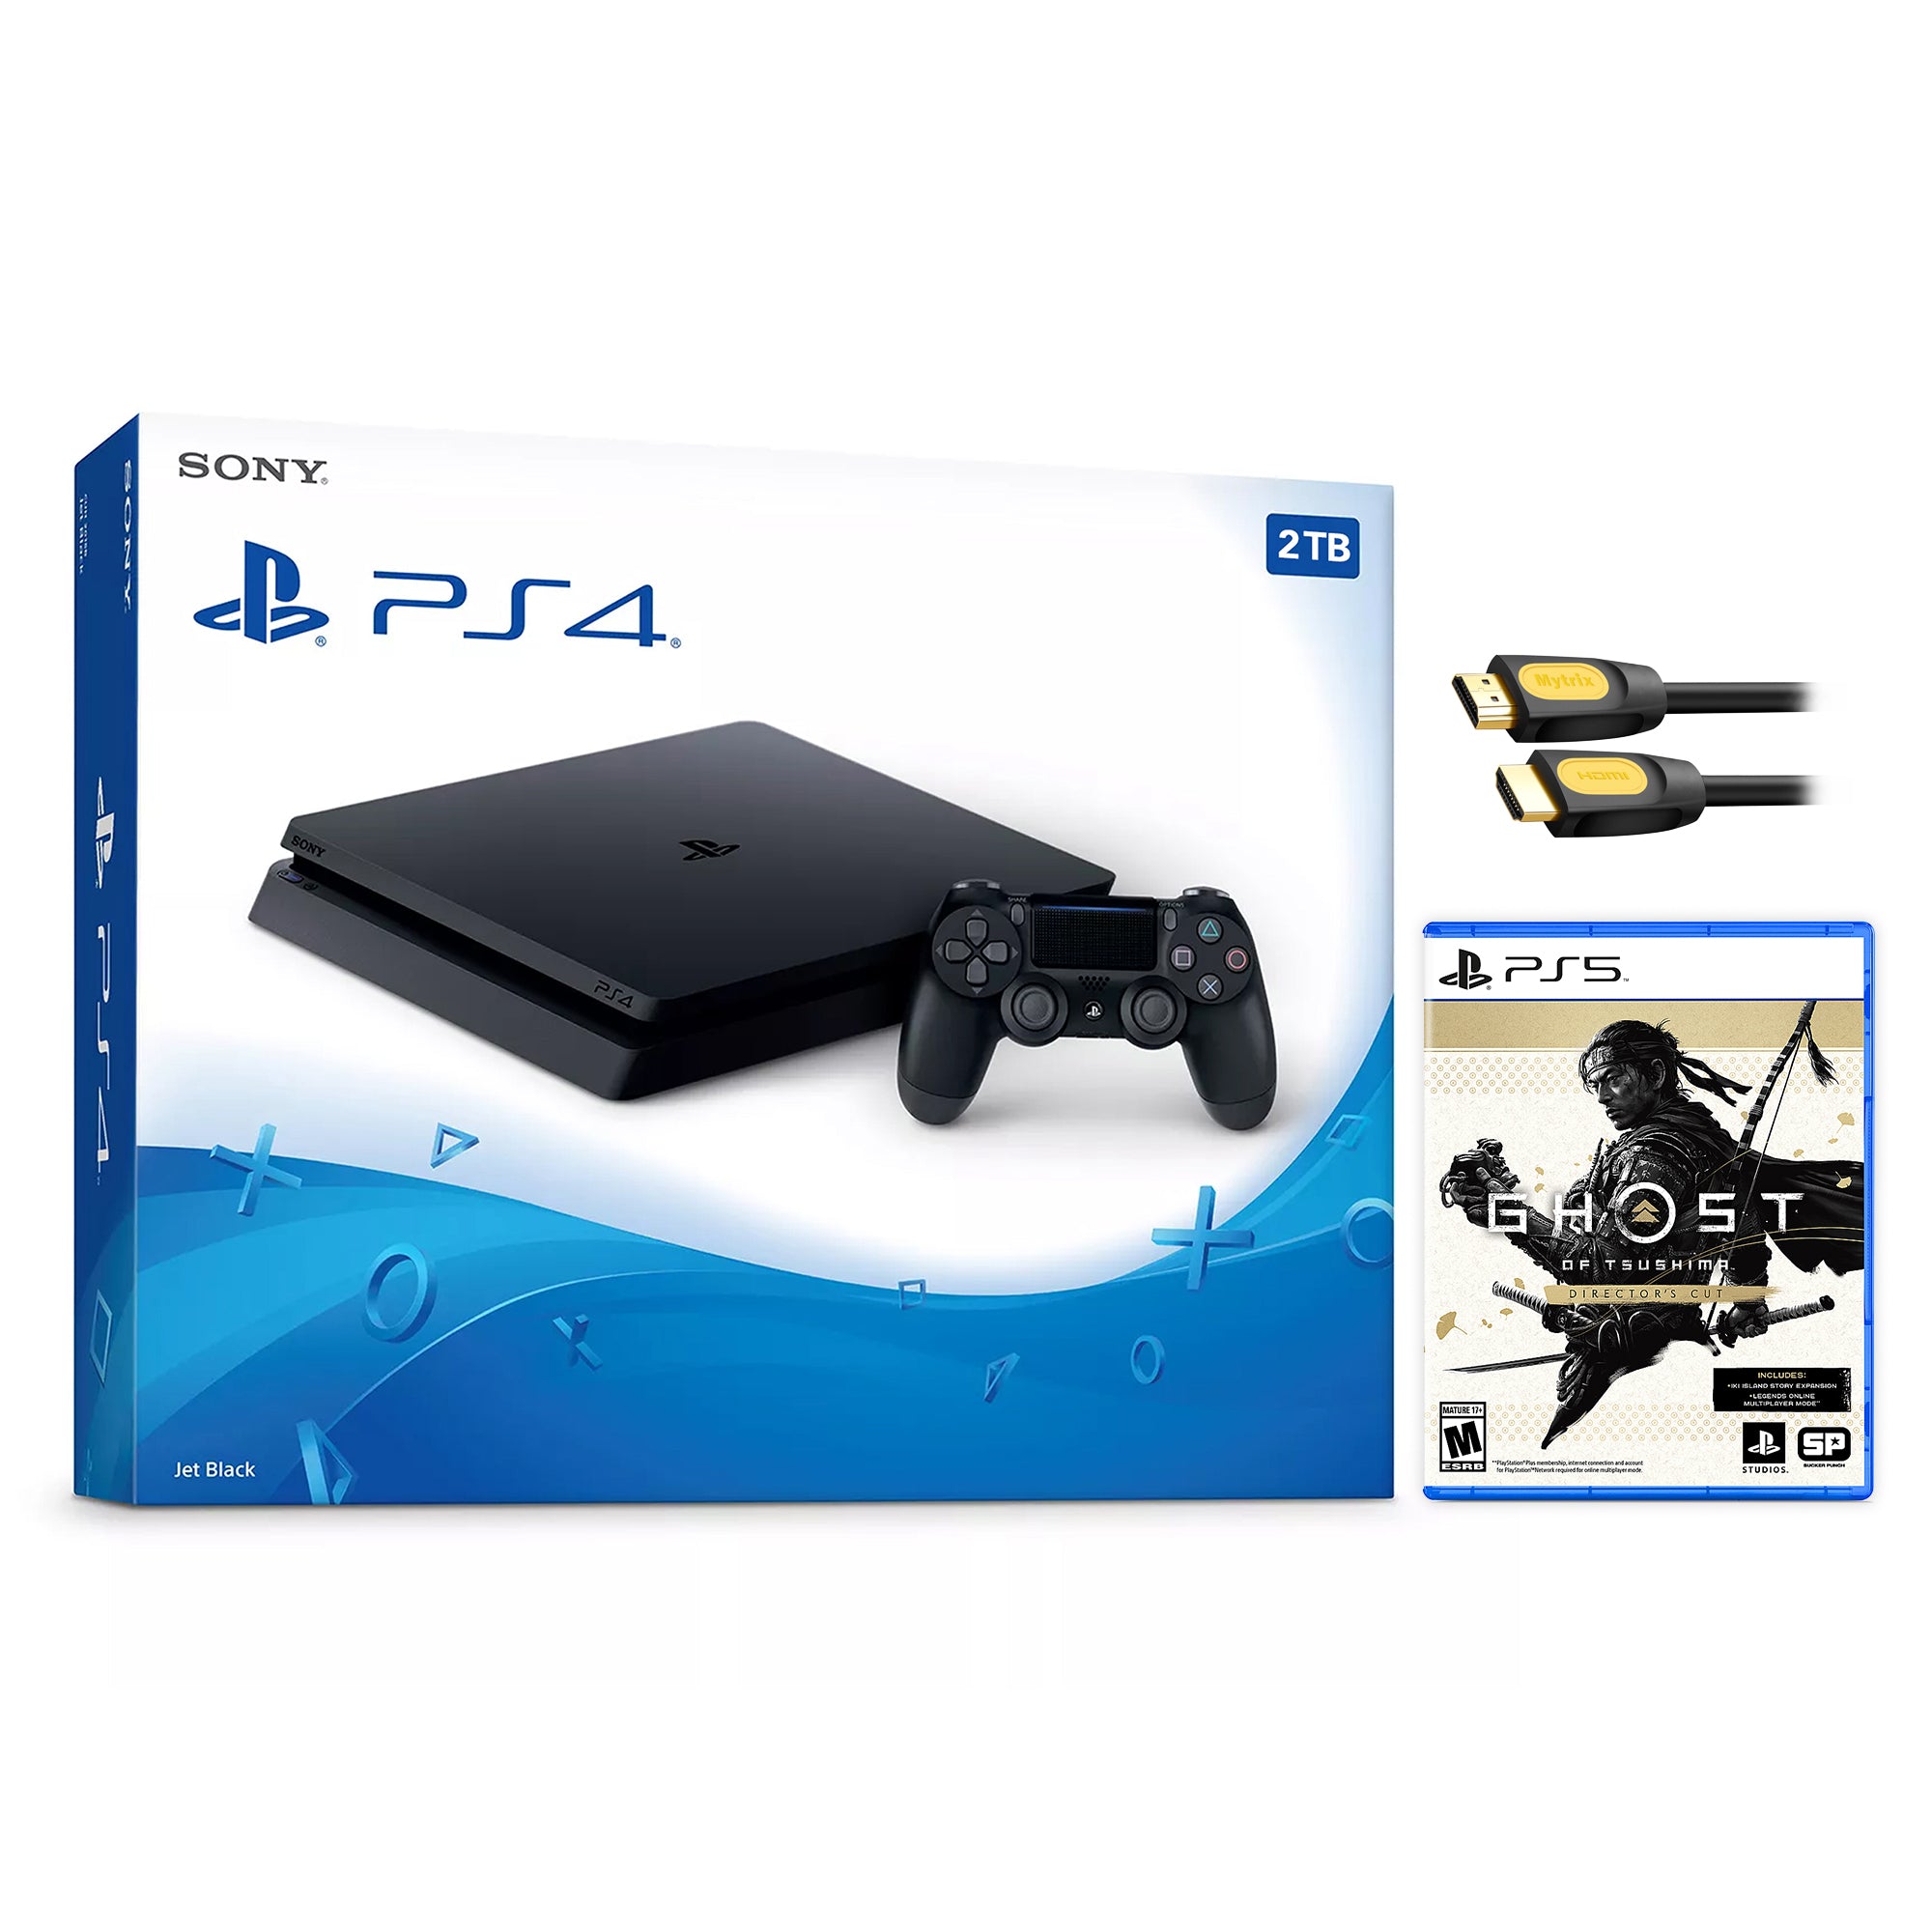 Sony PlayStation 4 Slim God of War PlayStation Hits Bundle Upgrade 2TB HDD PS4 Gaming Console, Jet Black, with Mytrix High Speed HDMI - Large Capacity Internal Hard Drive Enhanced PS4 Console